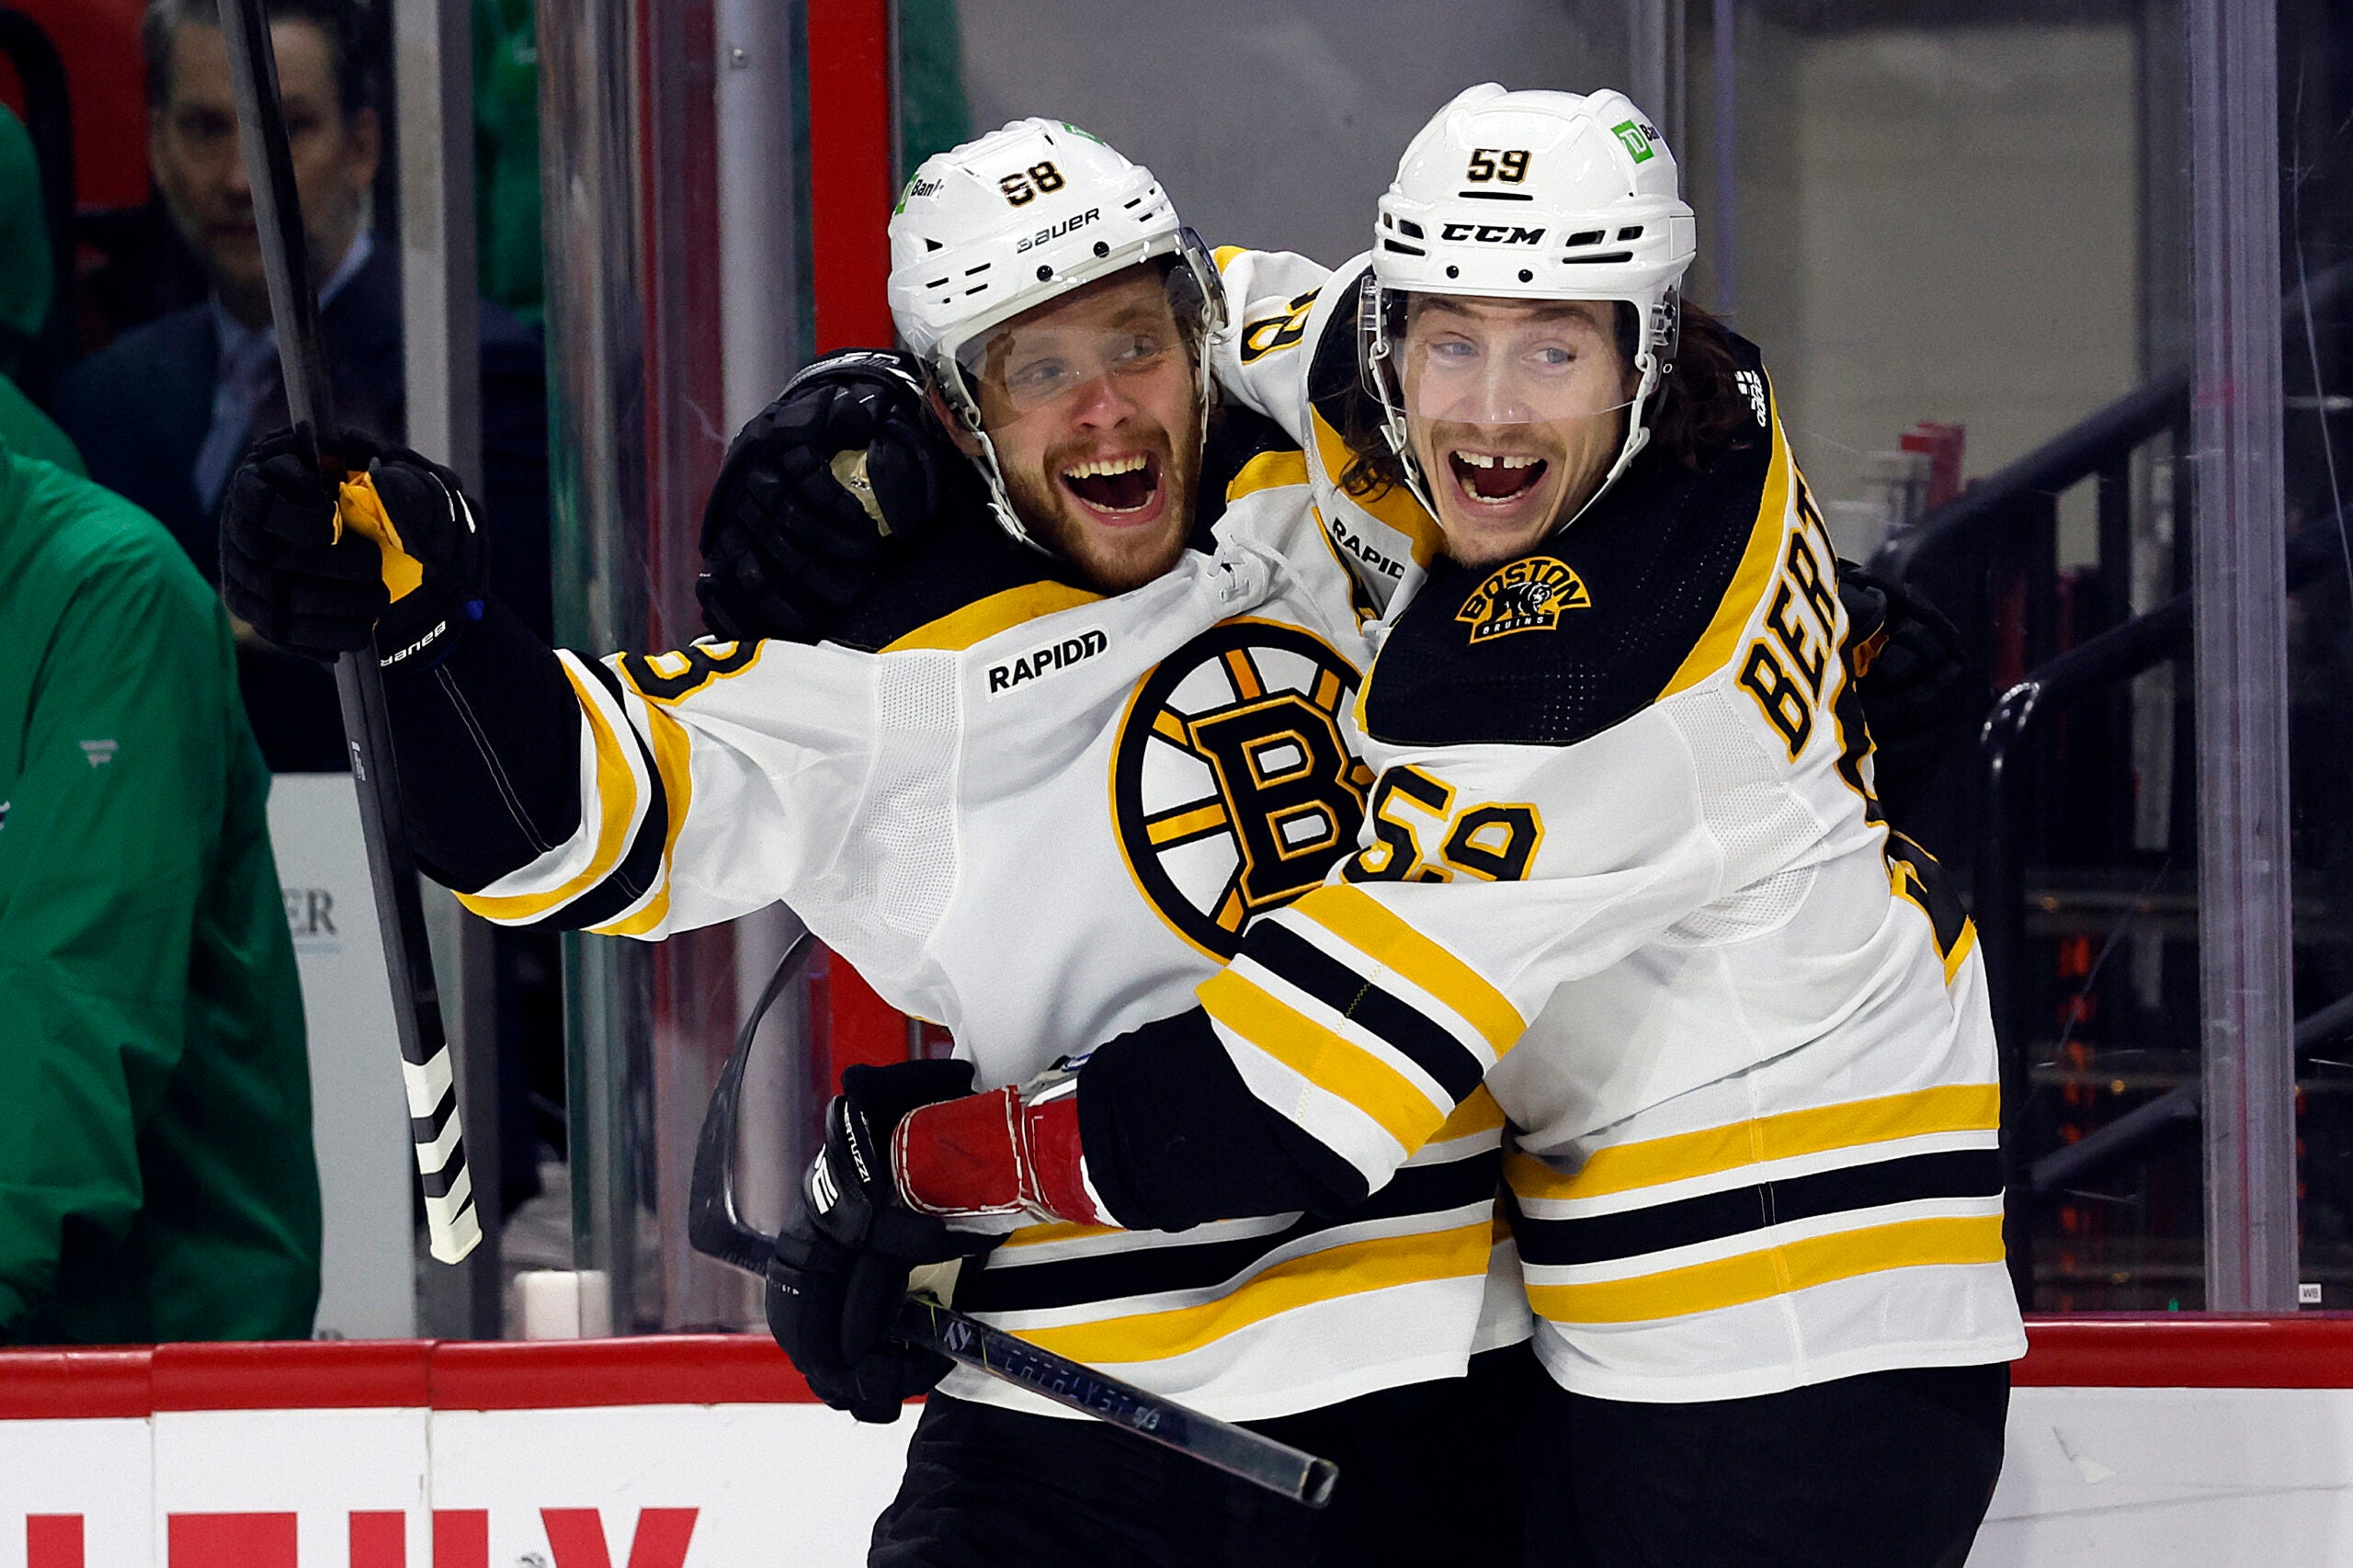 Boston Bruins' David Pastrnak (88) celebrates after his goal with teammate Tyler Bertuzzi (59) during the first period of an NHL hockey game against the Carolina Hurricanes in Raleigh, N.C., Sunday, March 26, 2023.